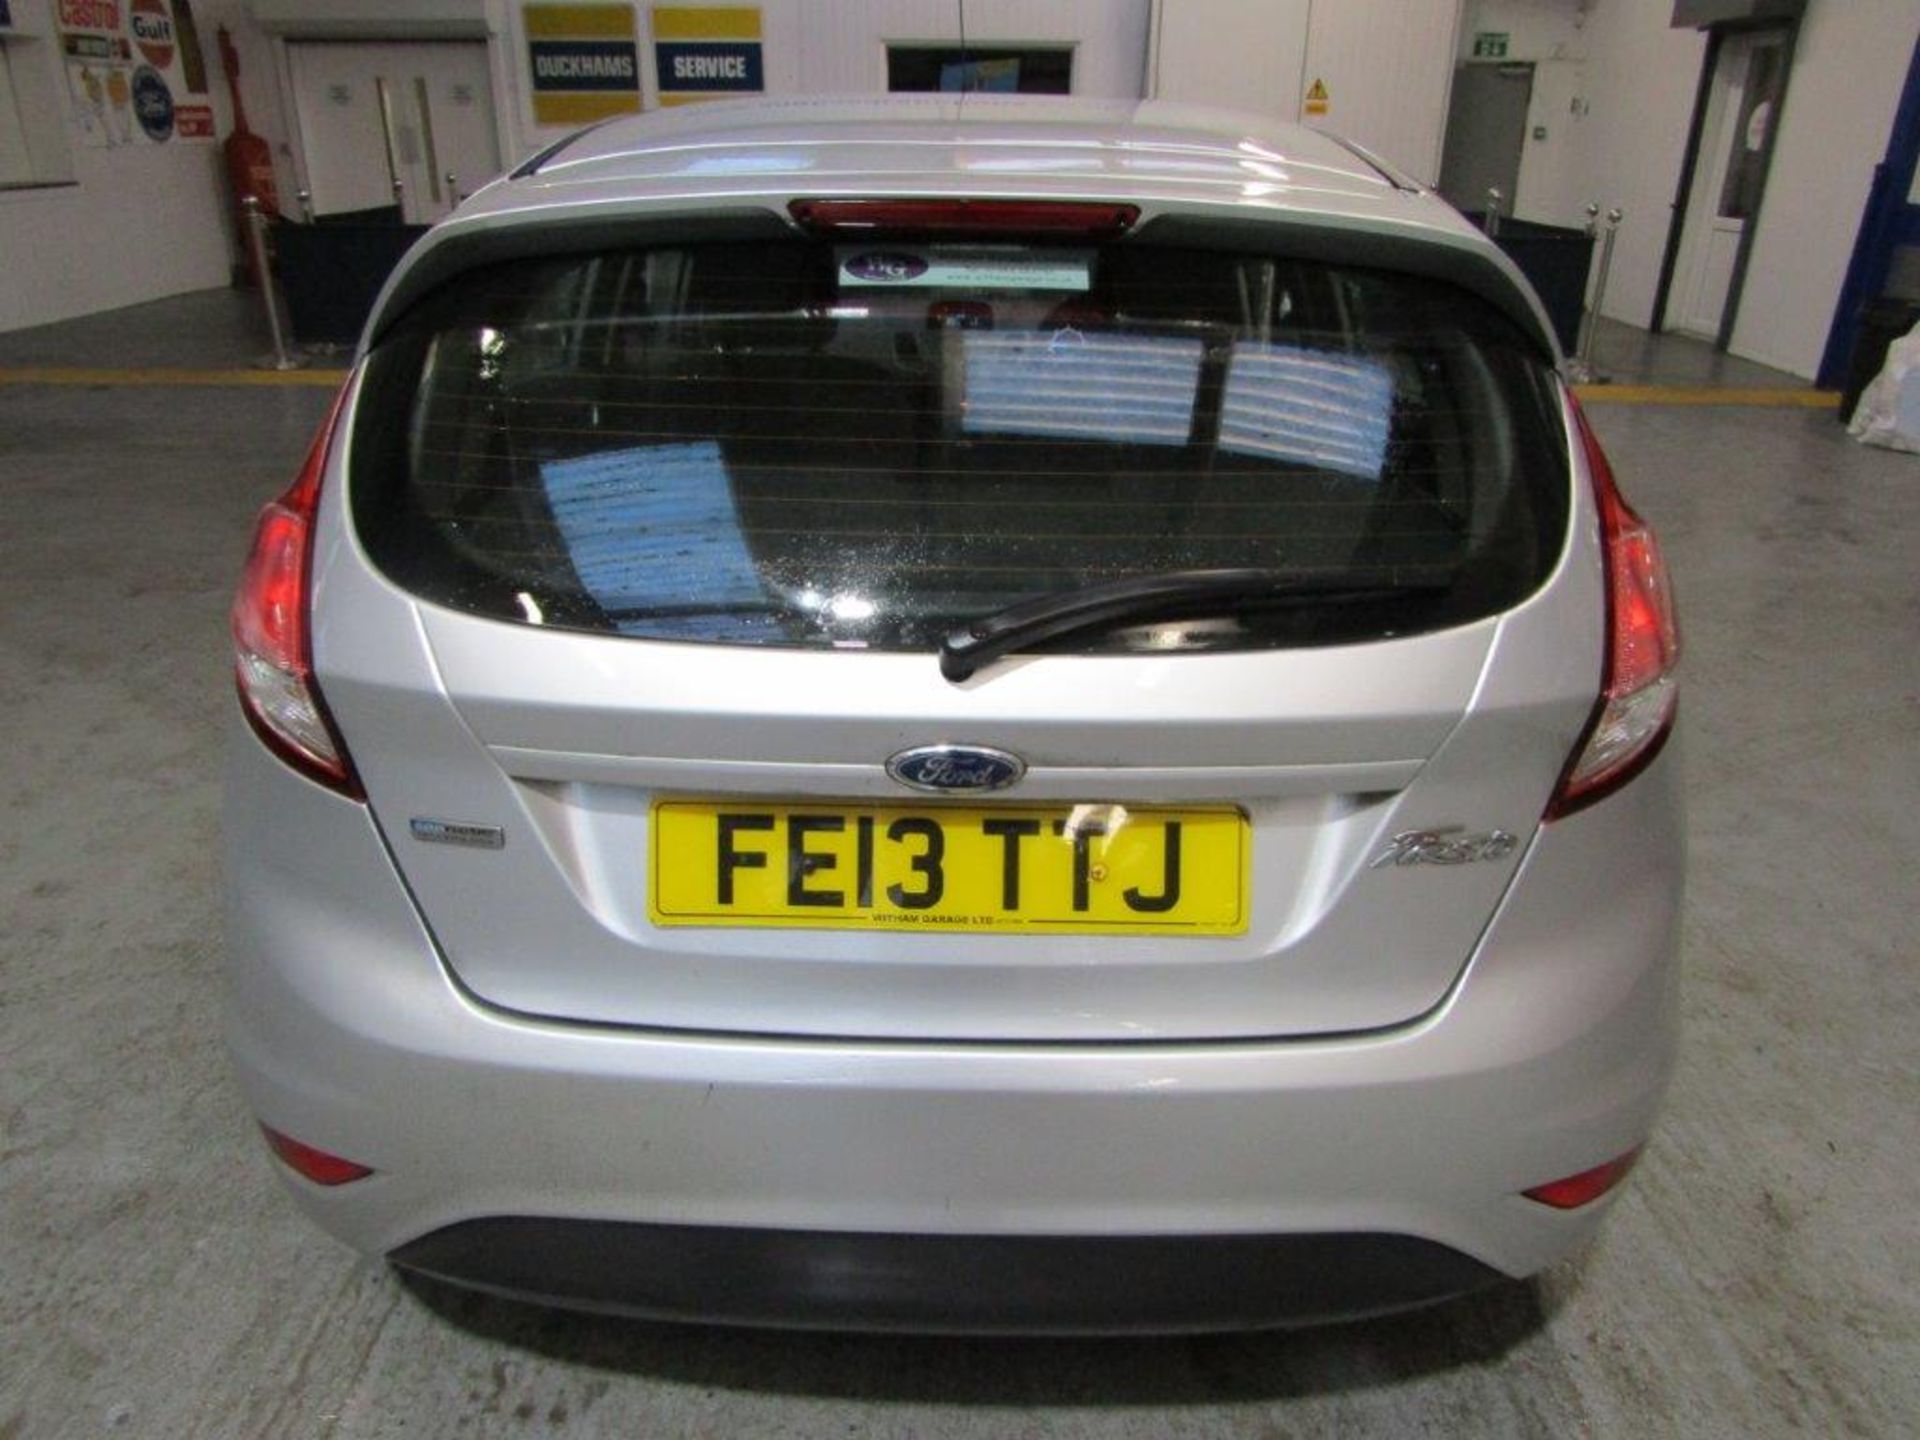 13 13 Ford Fiesta Style Eco TDCI - Image 3 of 22